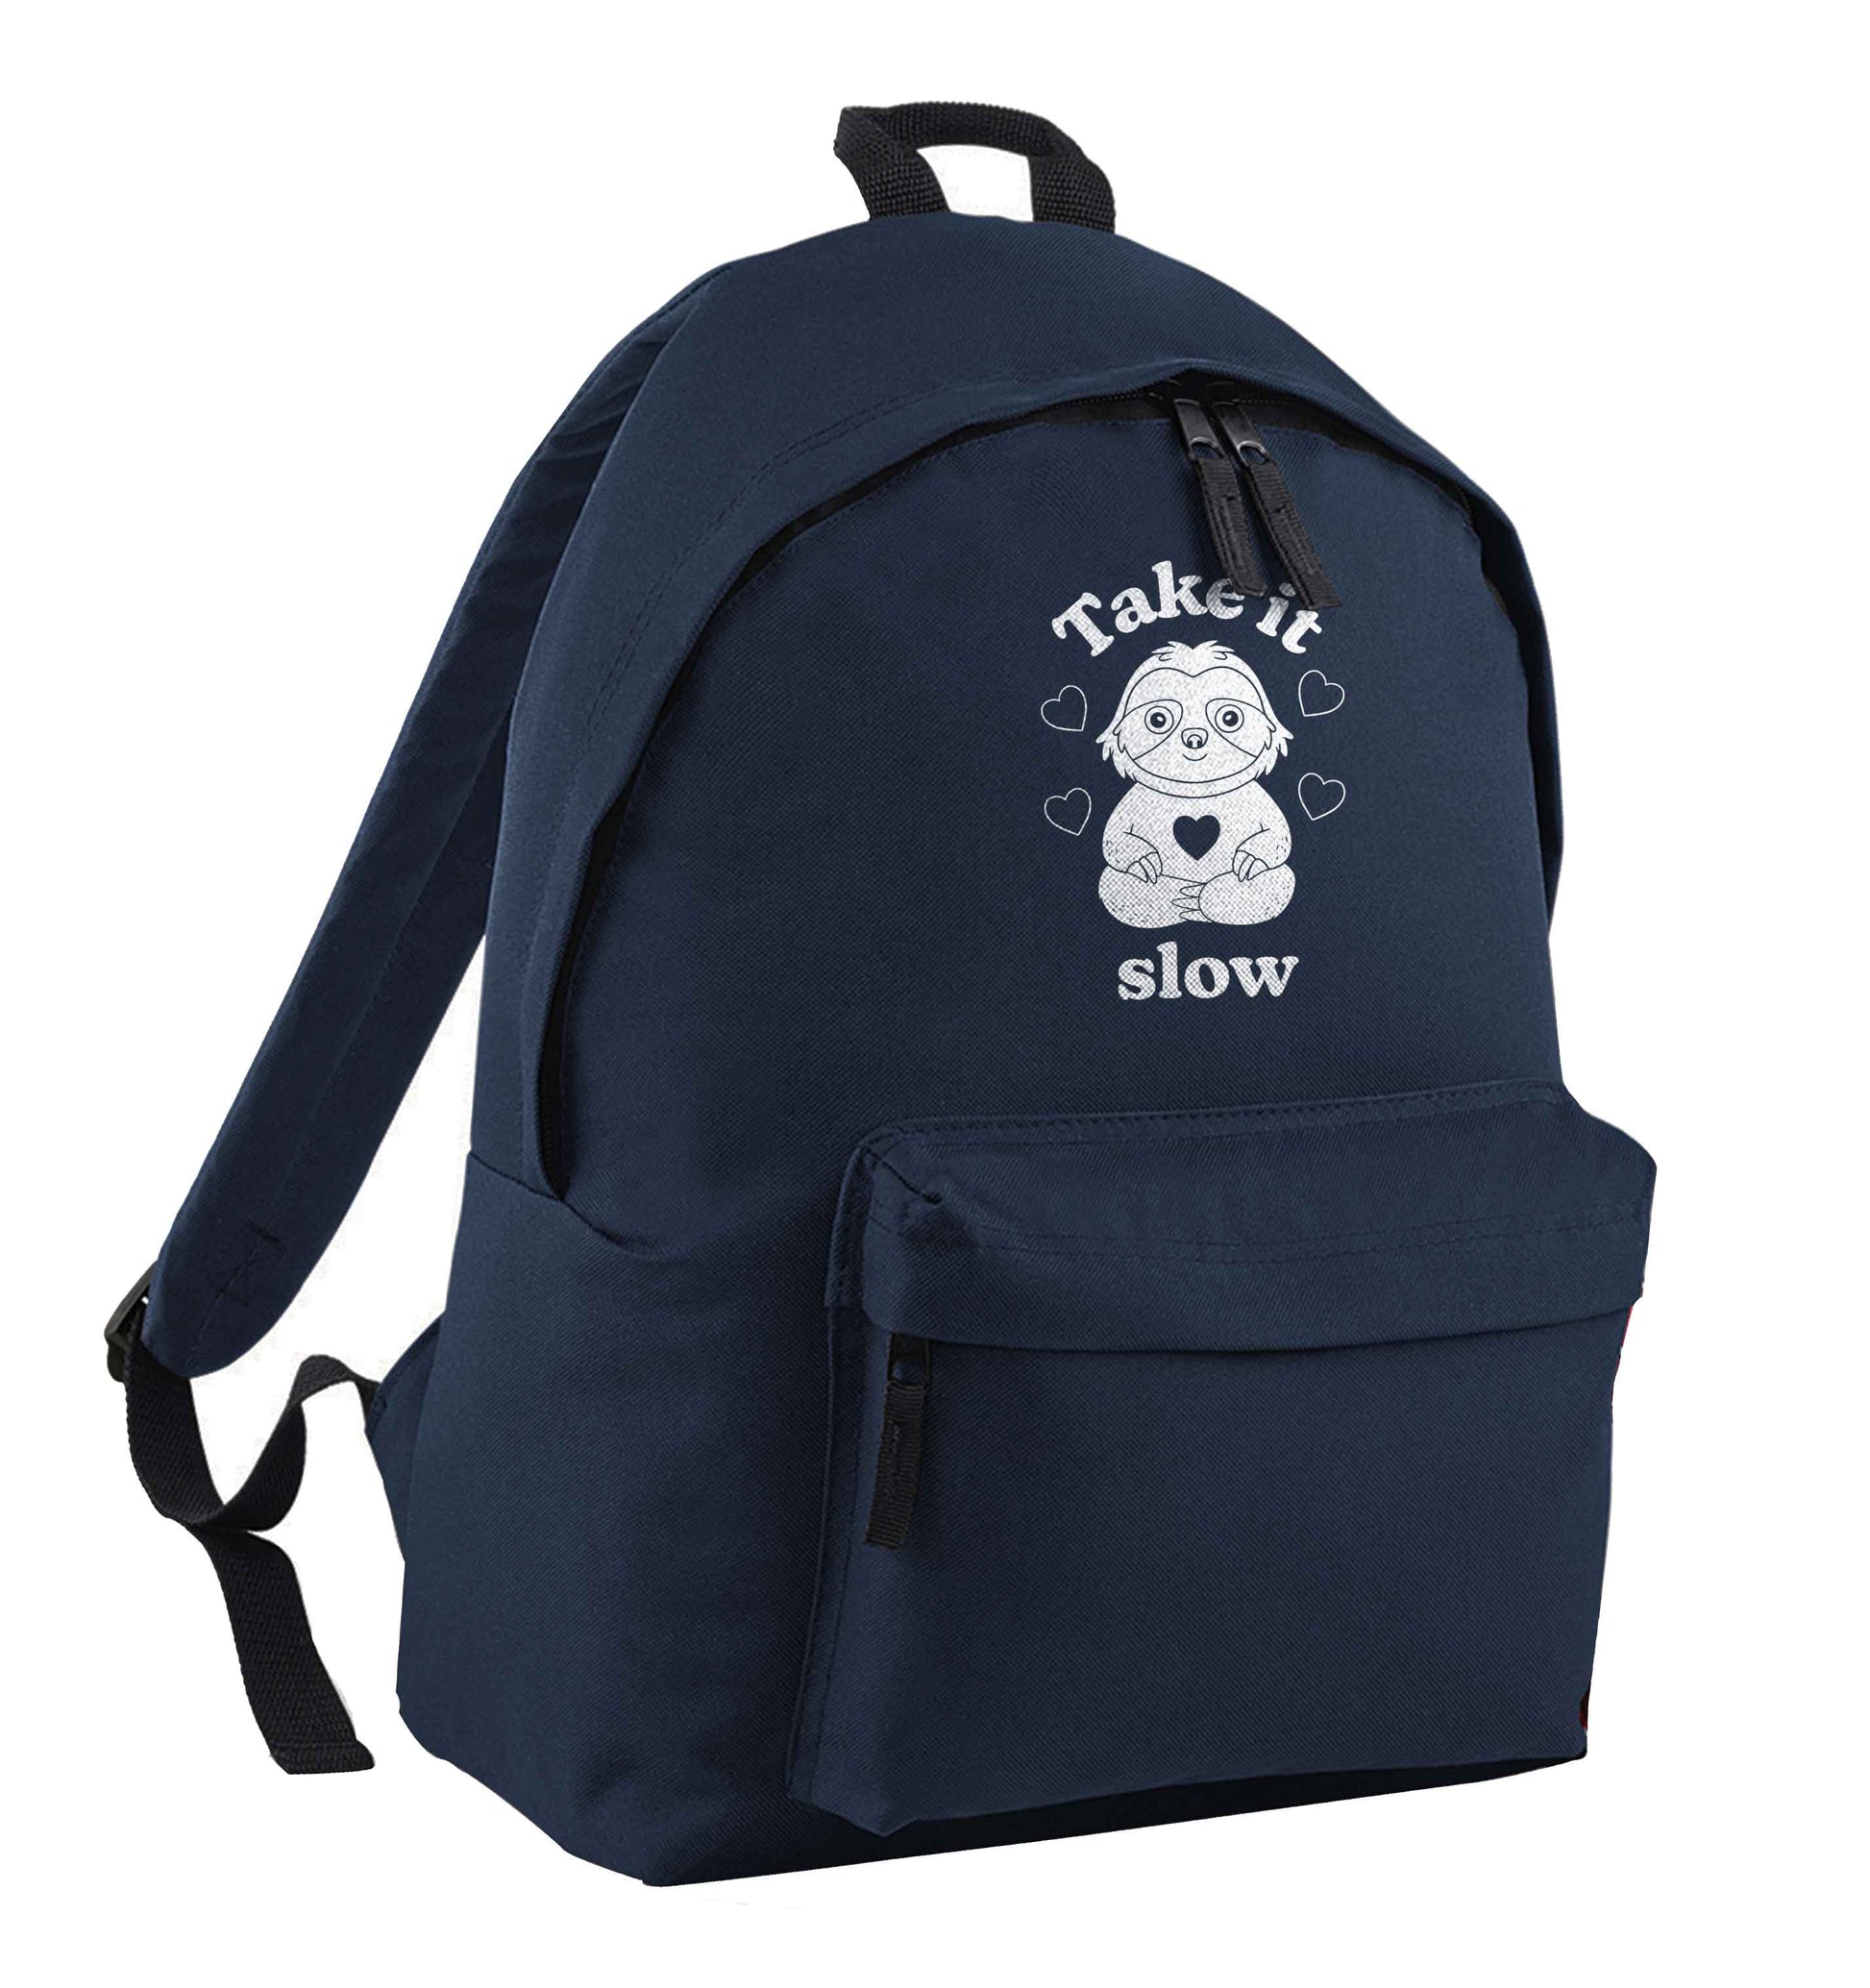 Take it slow navy children's backpack